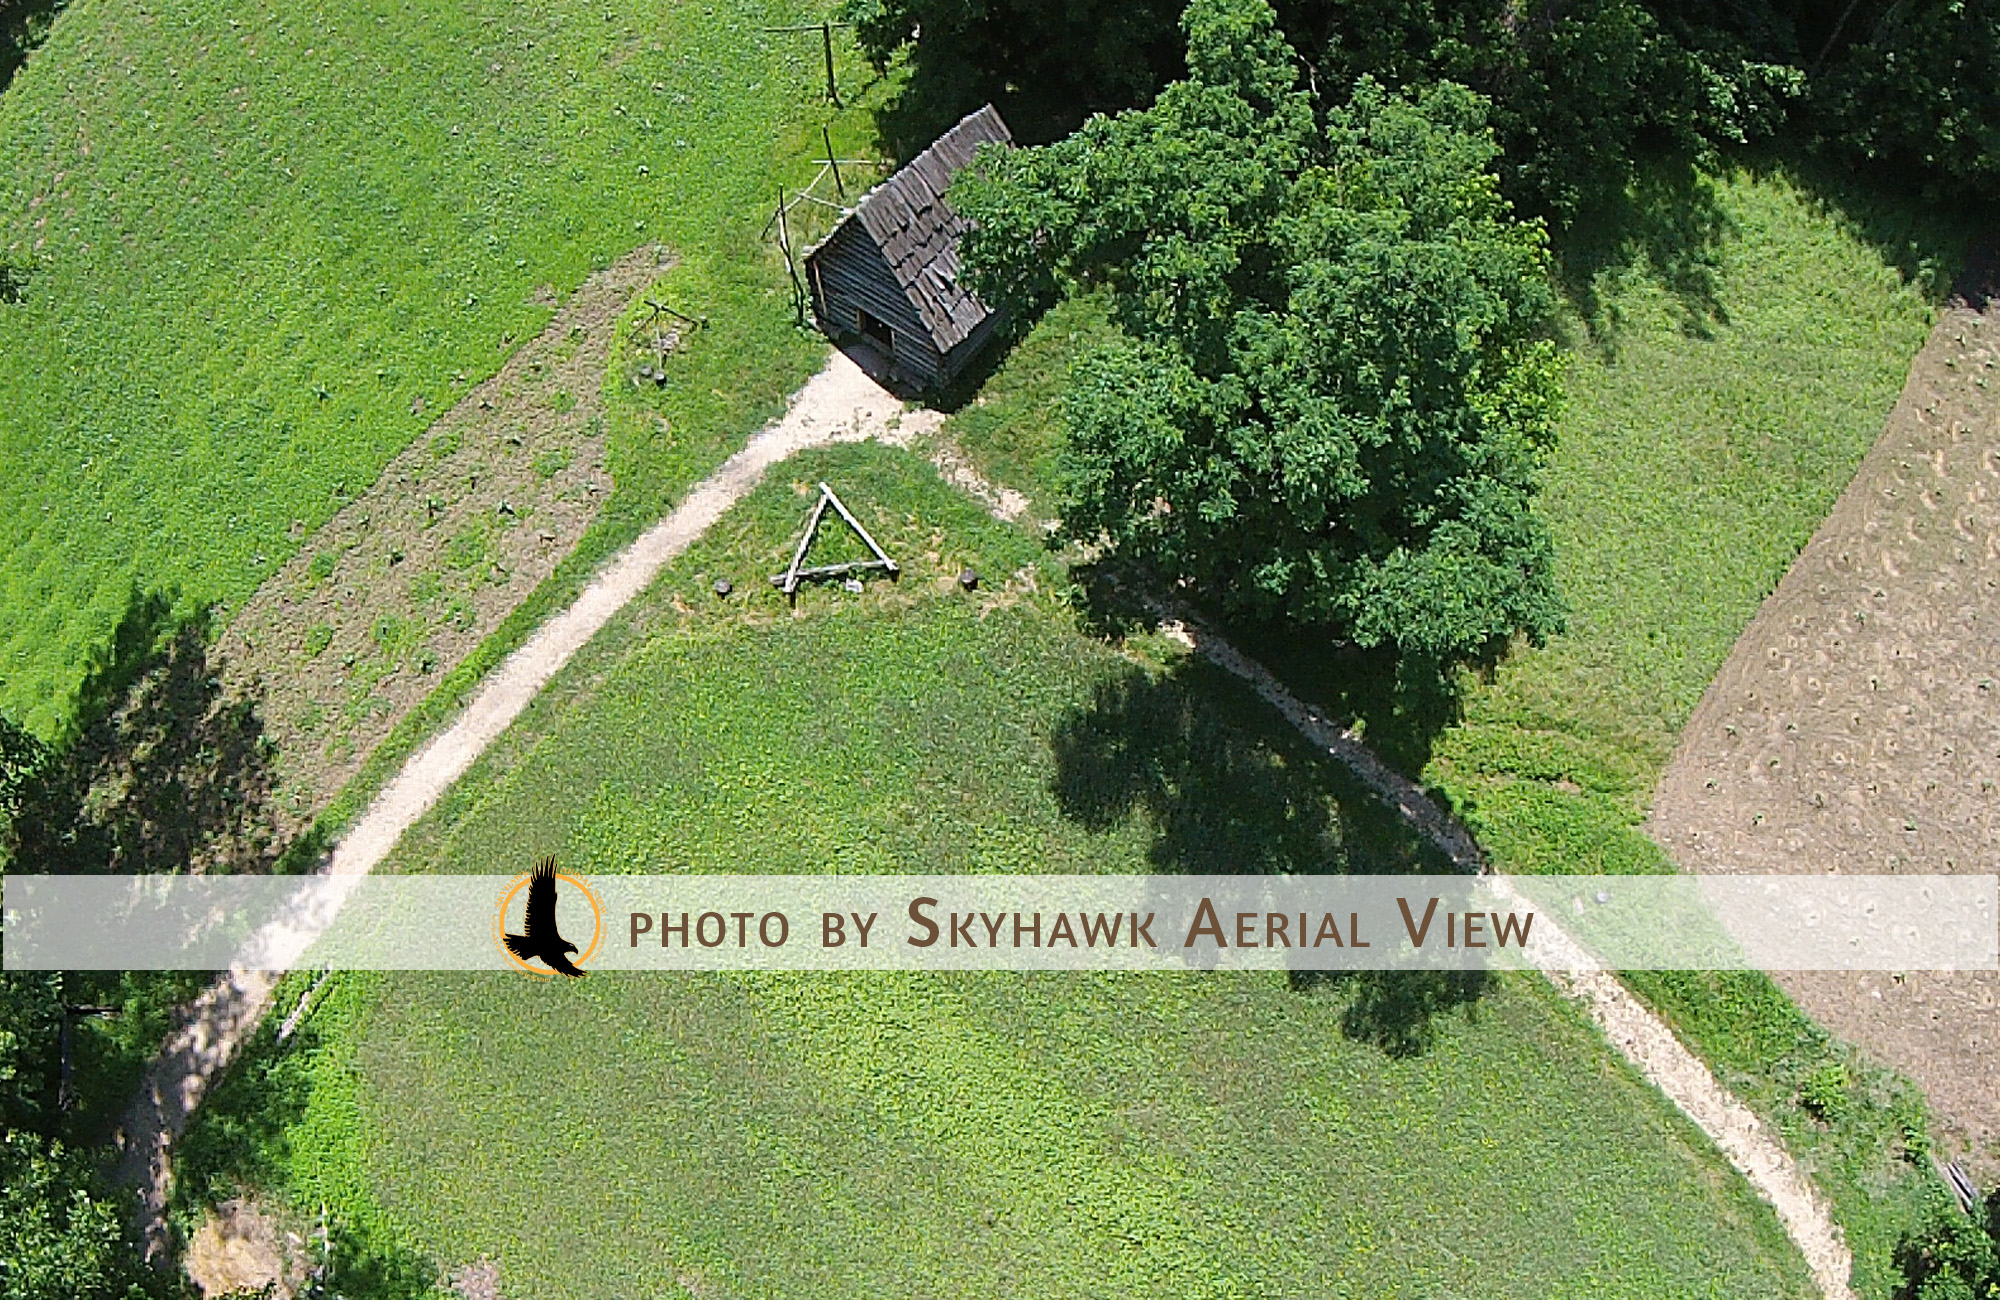 Special Places photography by Skyhawk Aerial View